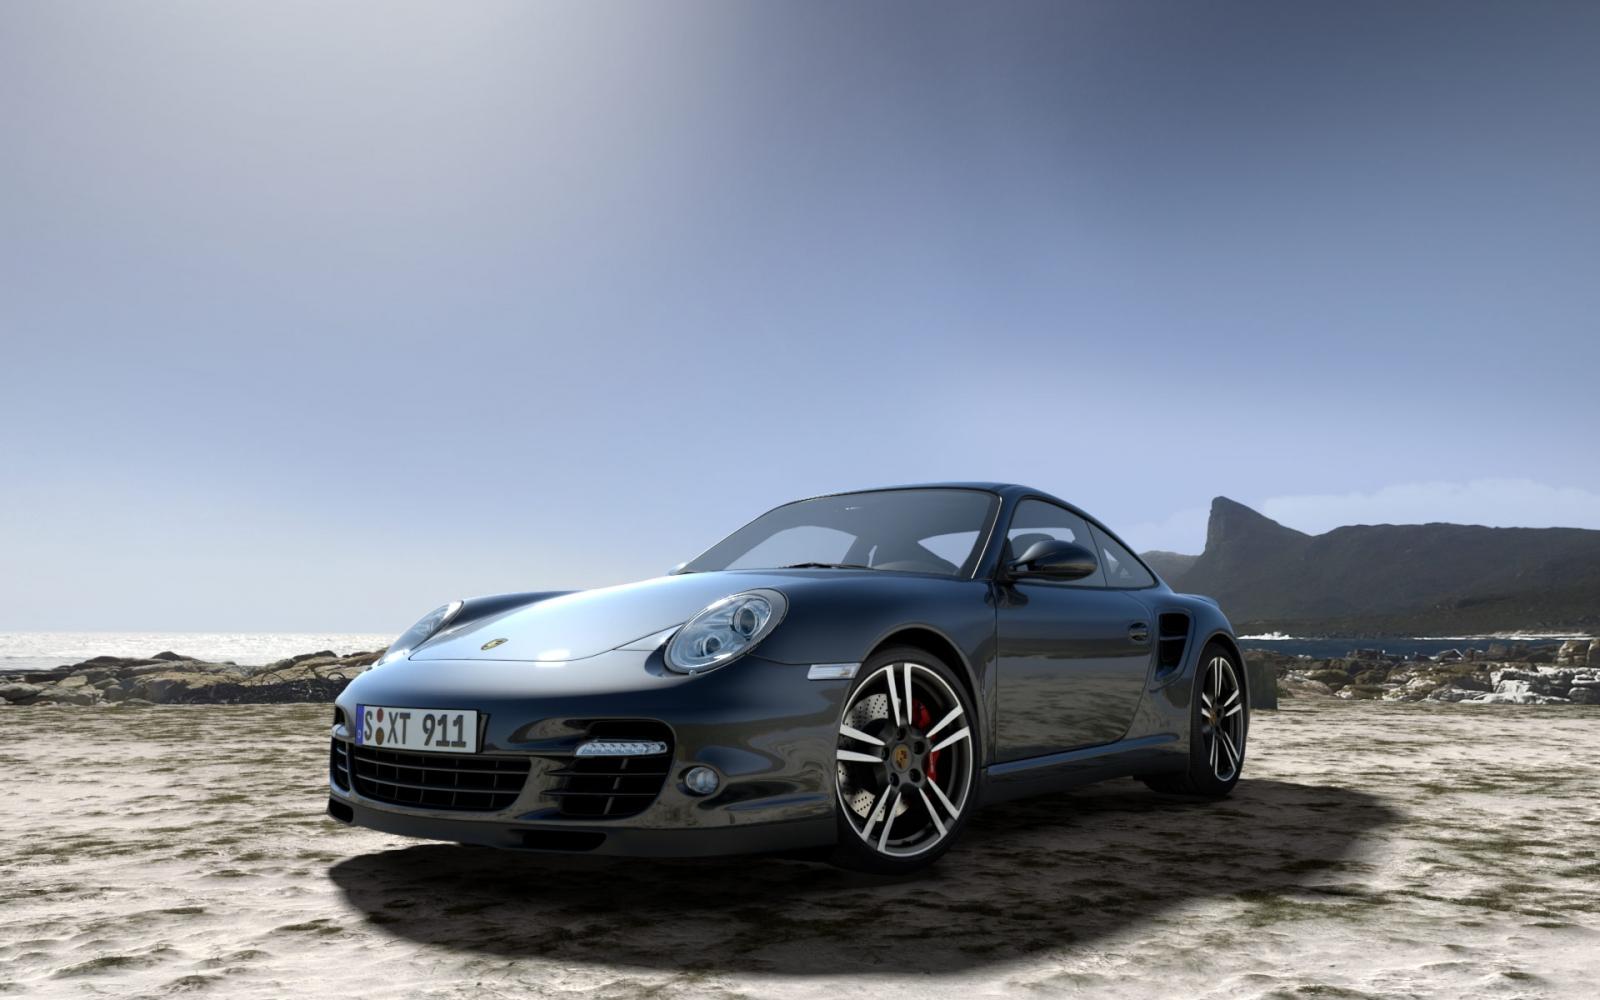 Official: New facelifted 997 Turbo revealed | Page 3 | GermanCarForum